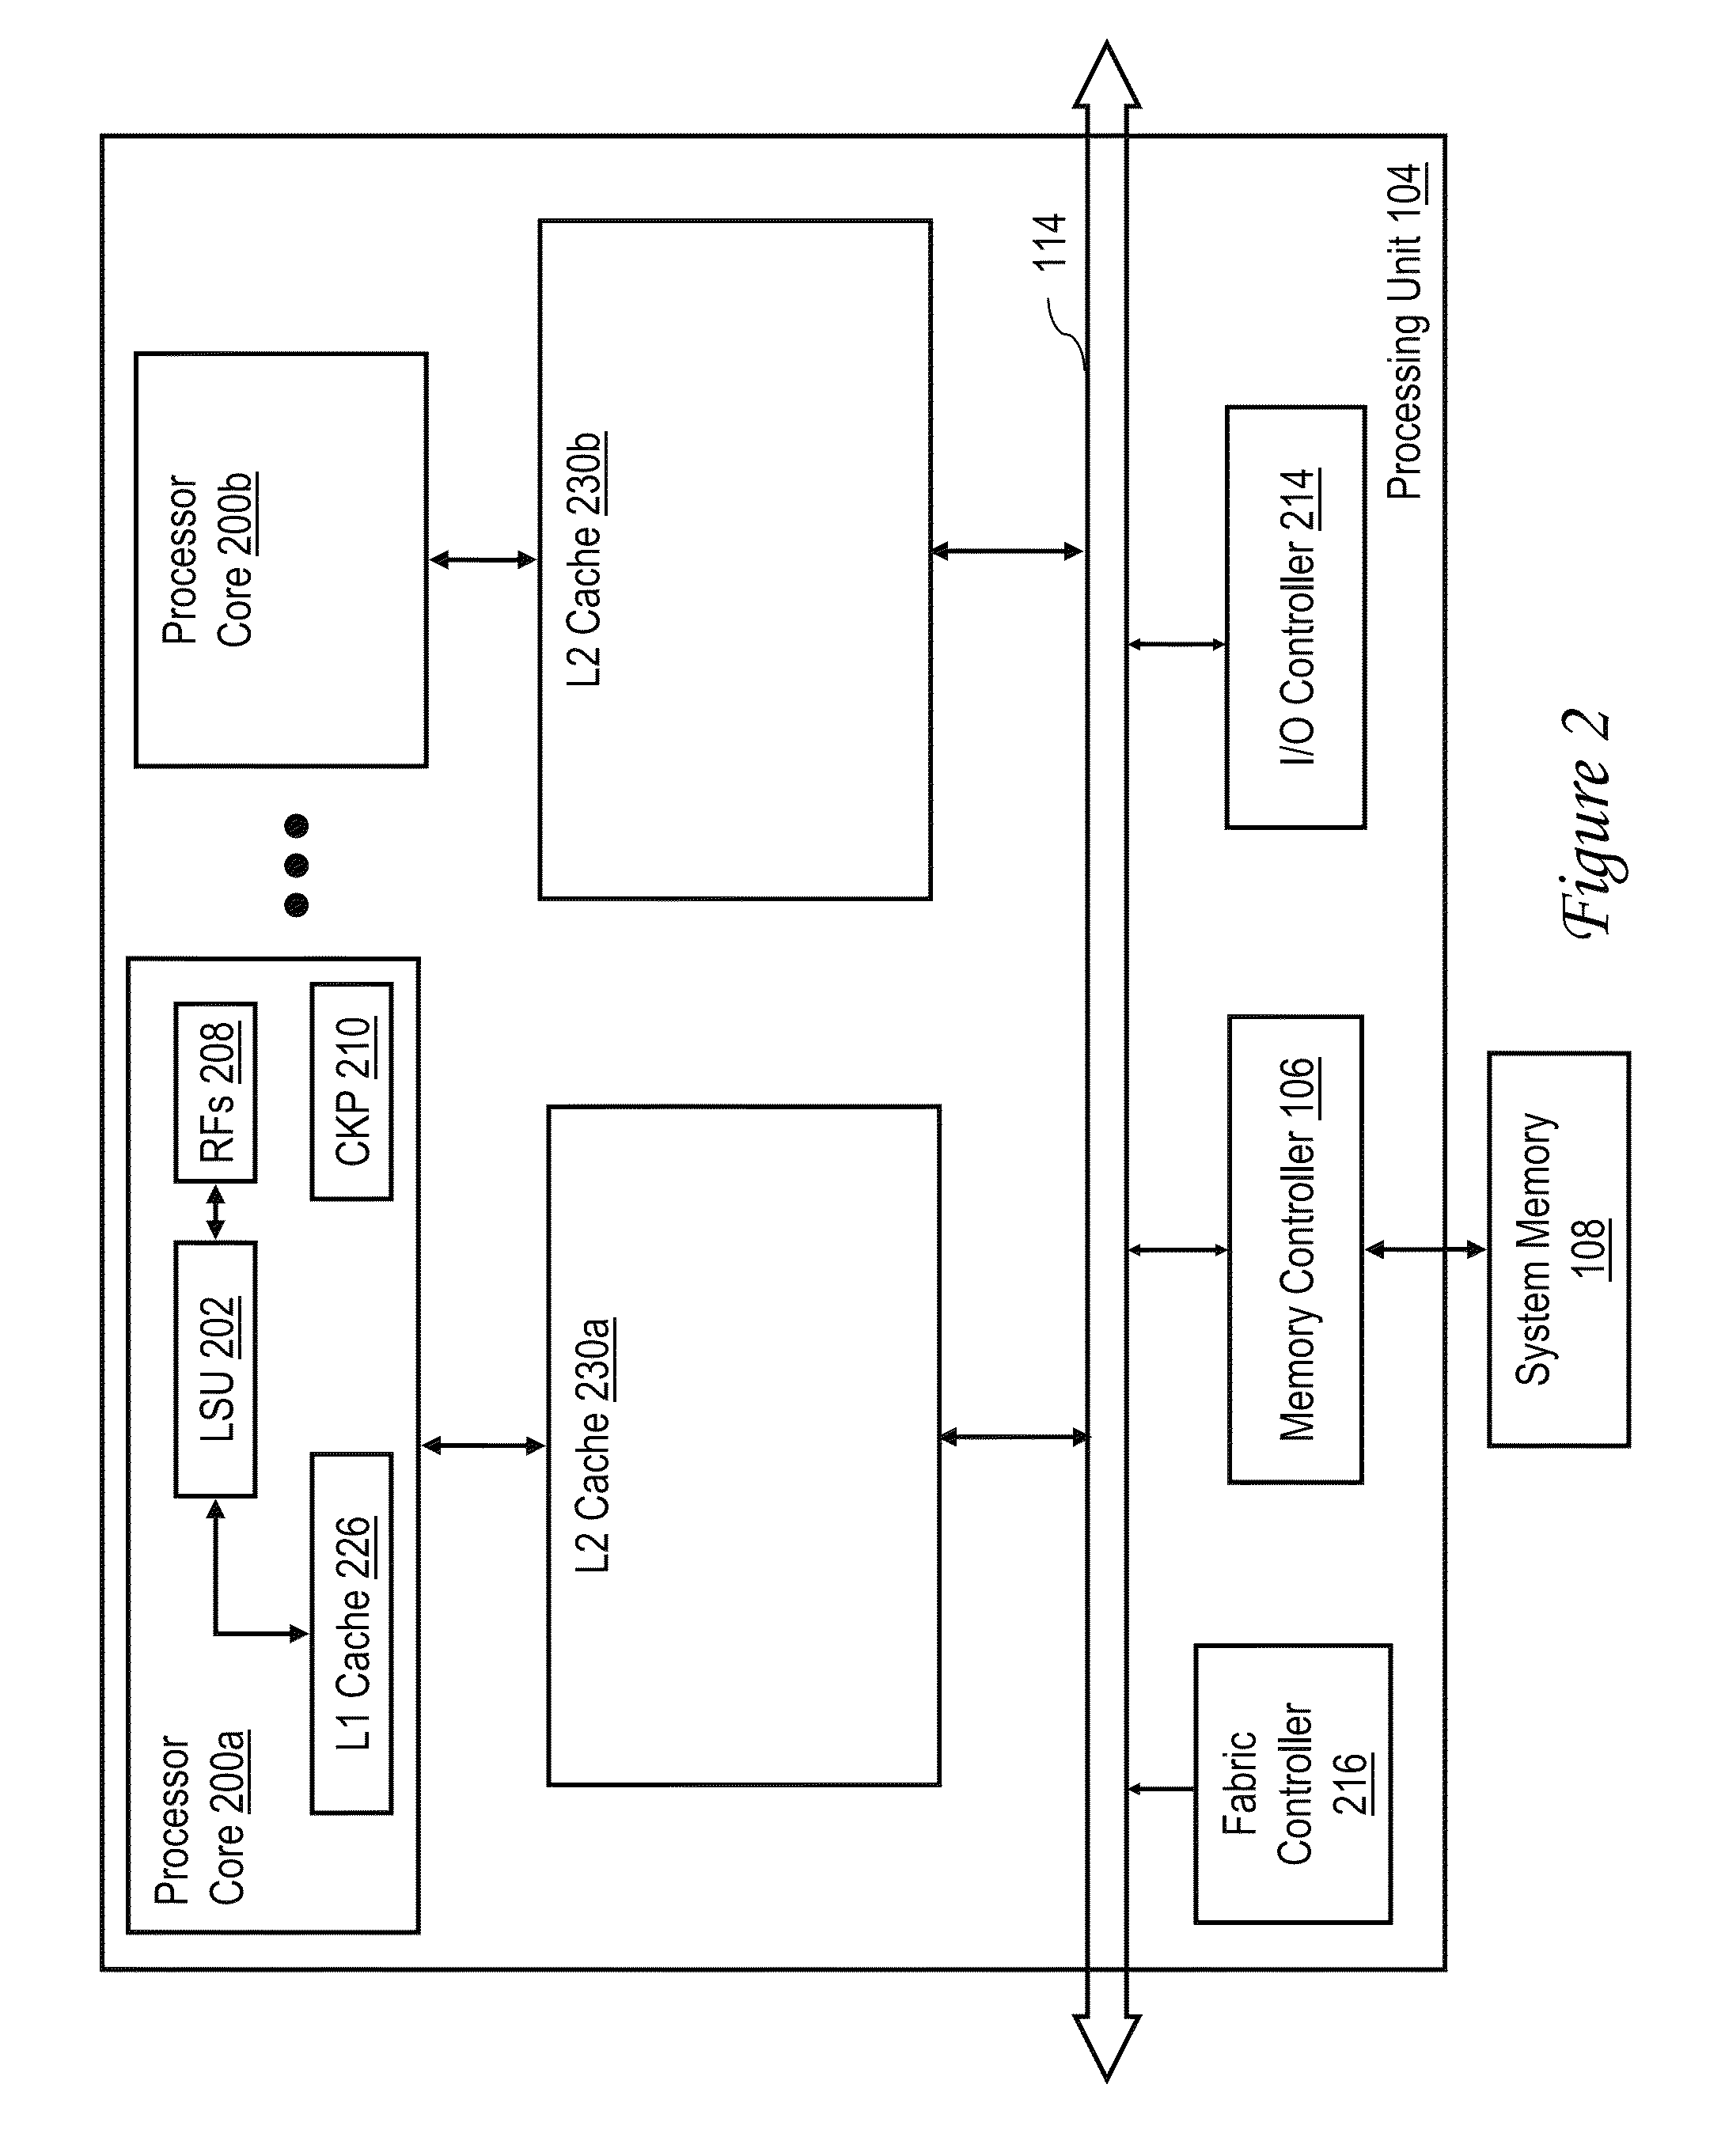 Management of transactional memory access requests by a cache memory